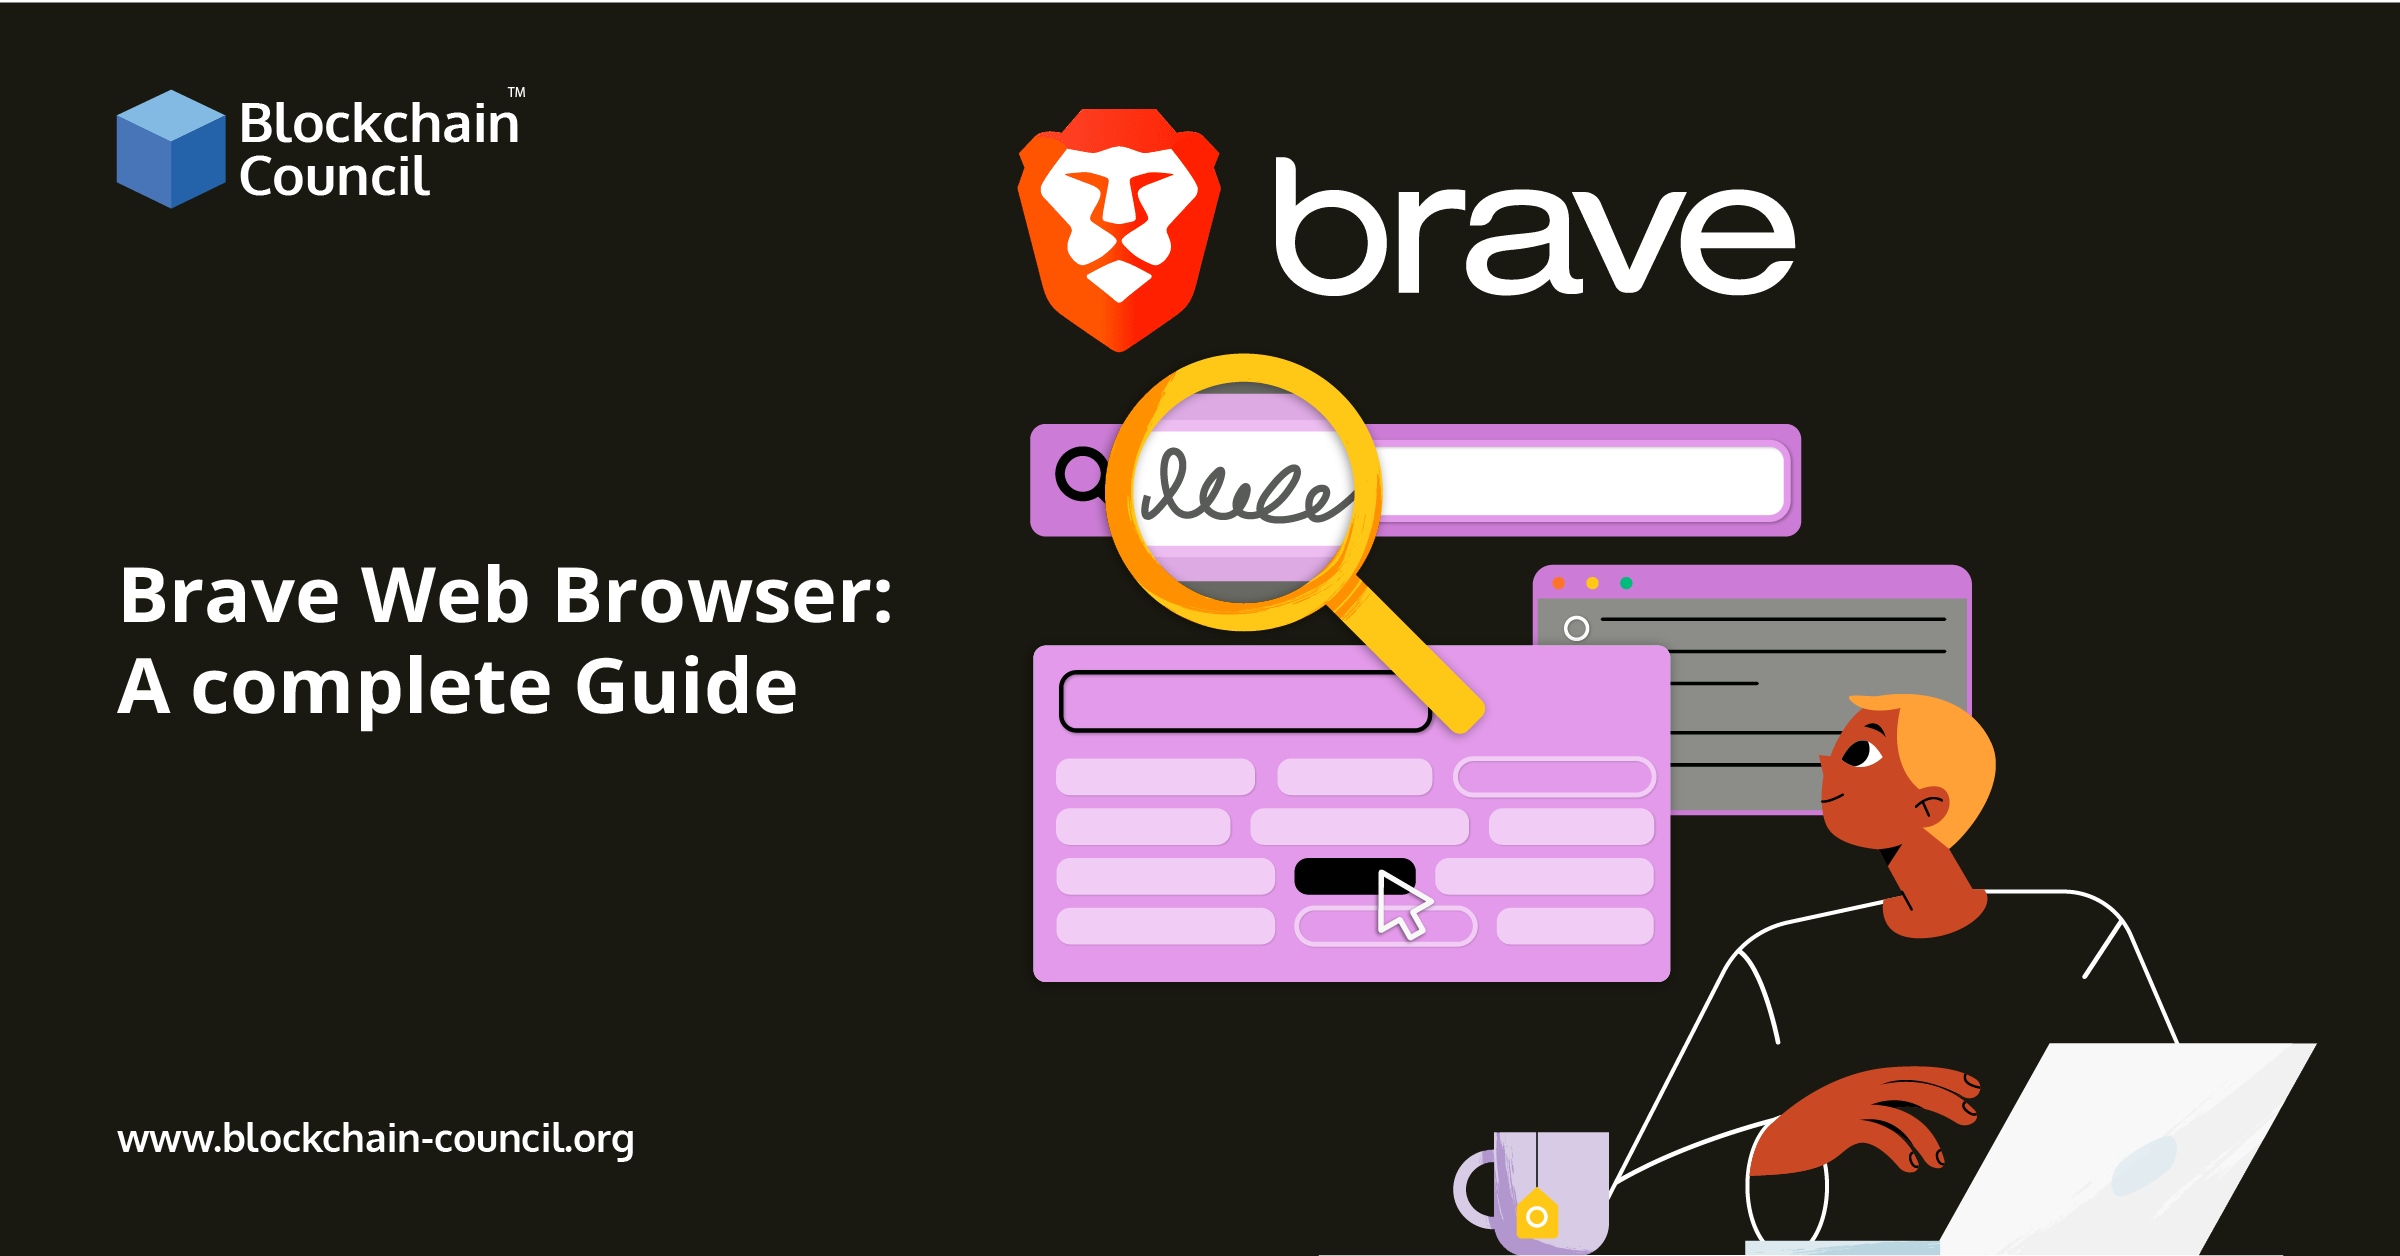 Brave is the first browser featured on the Epic Games Store